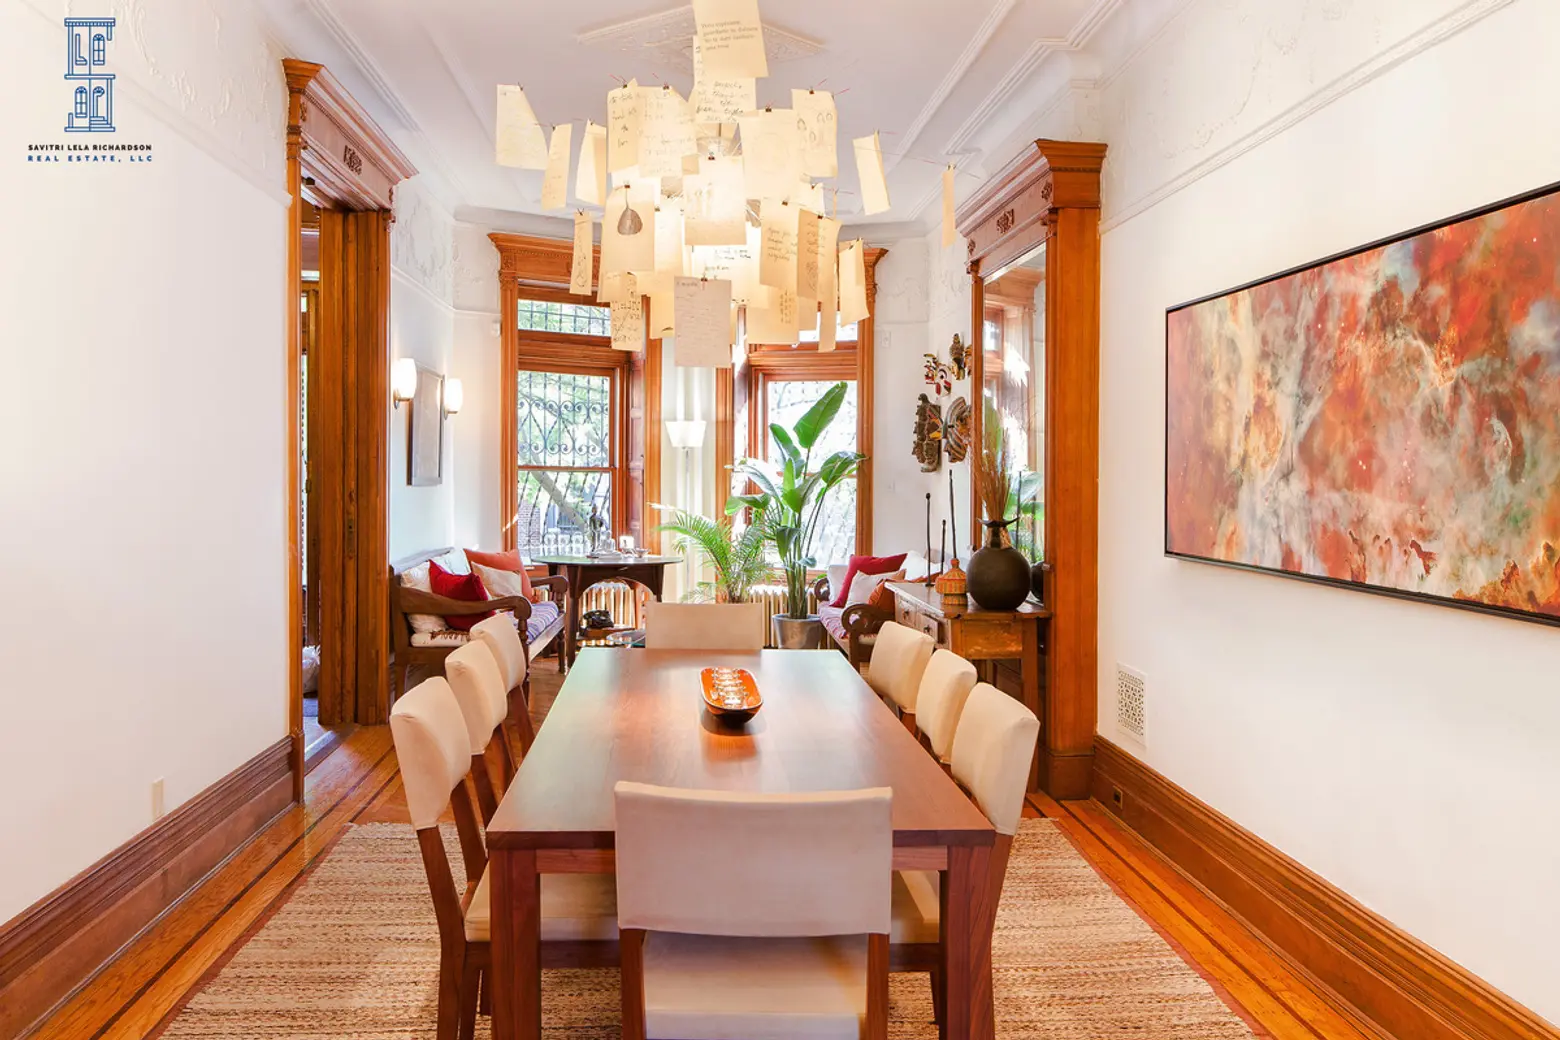 323 sterling place, dining room, prospect heights